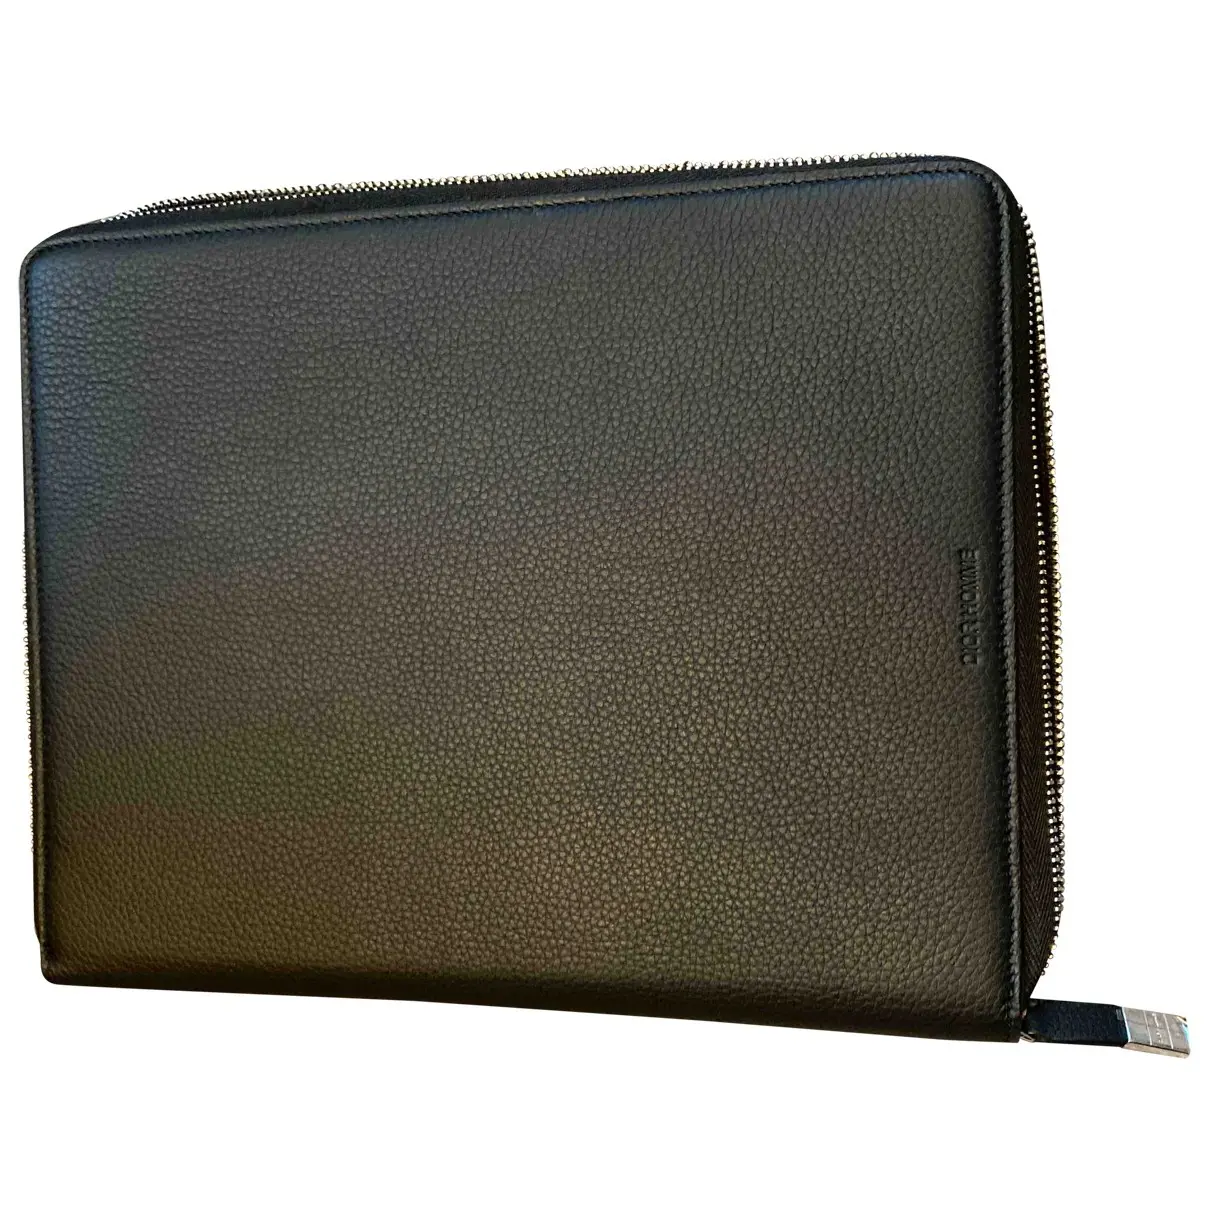 Leather purse Dior Homme